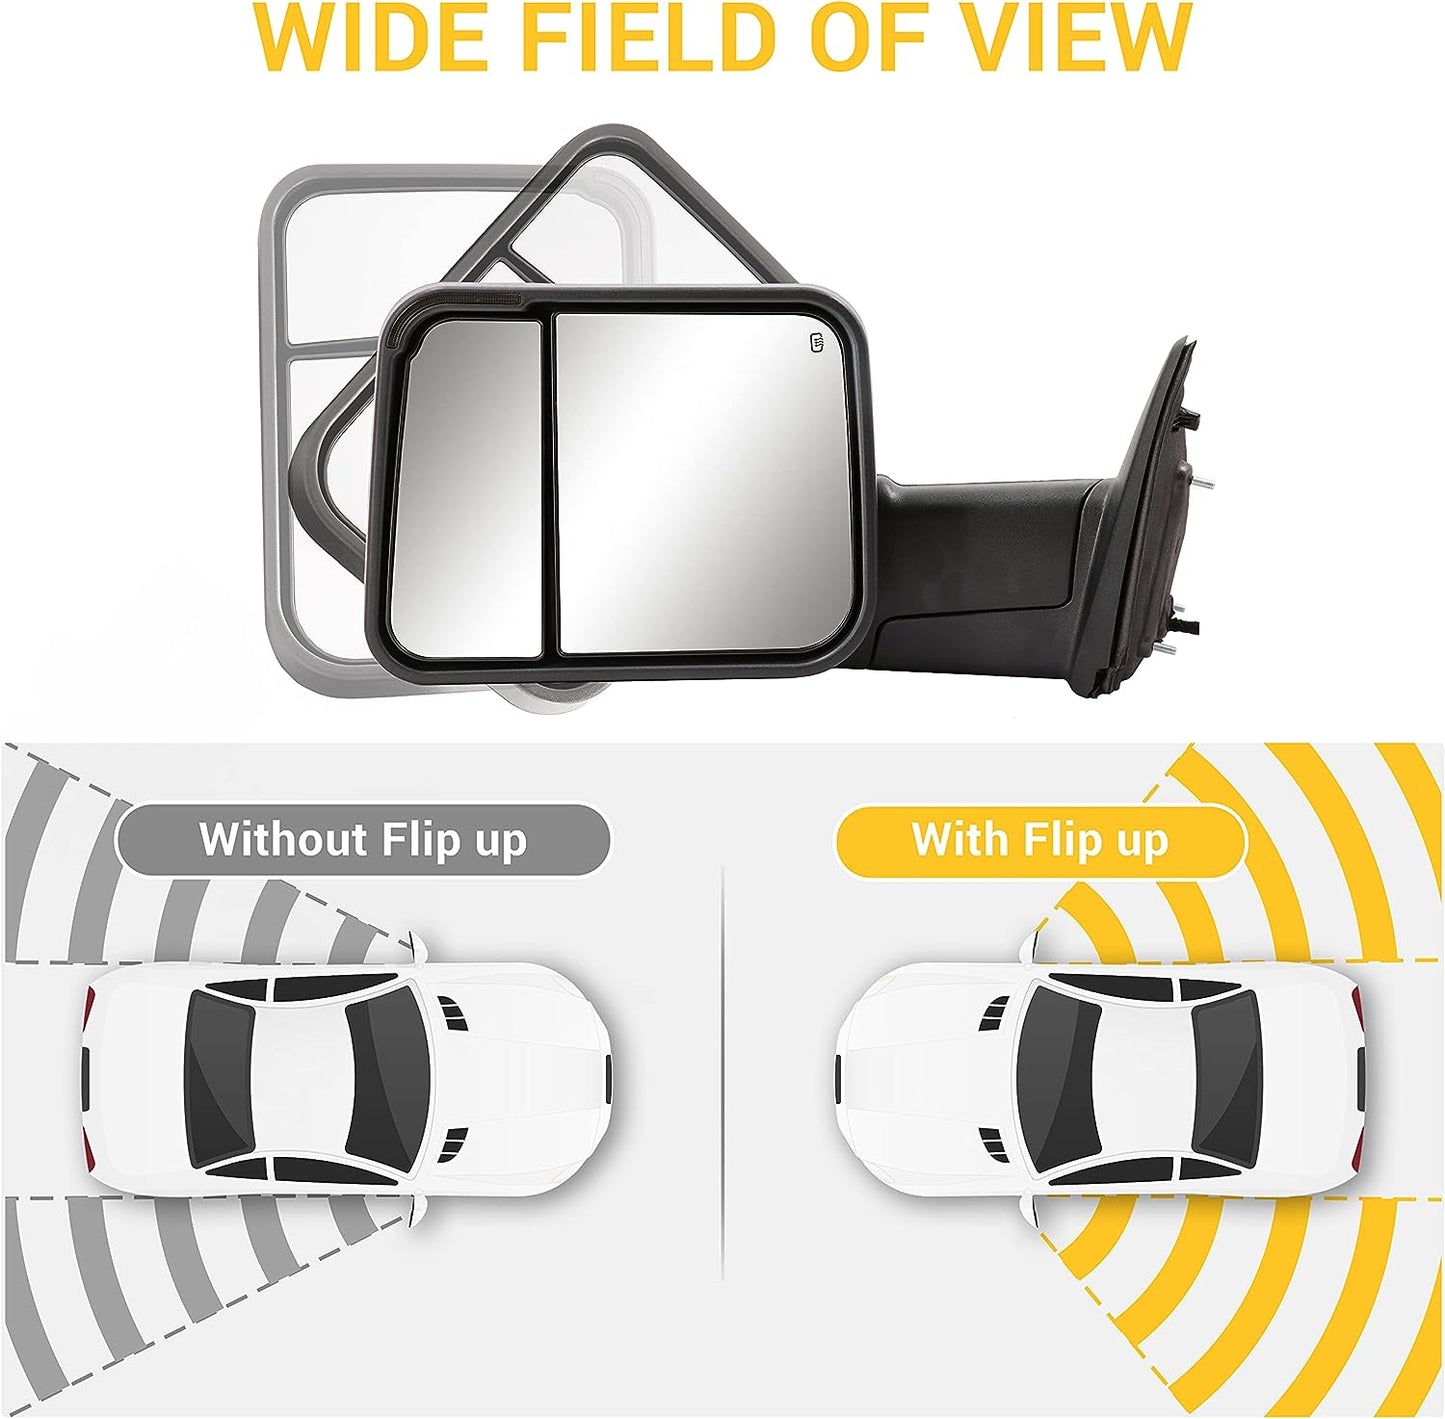 New Pattern Towing Mirrors for 2009-2018 Dodge Ram 1500, 2010-2018 Dodge Ram 2500 3500